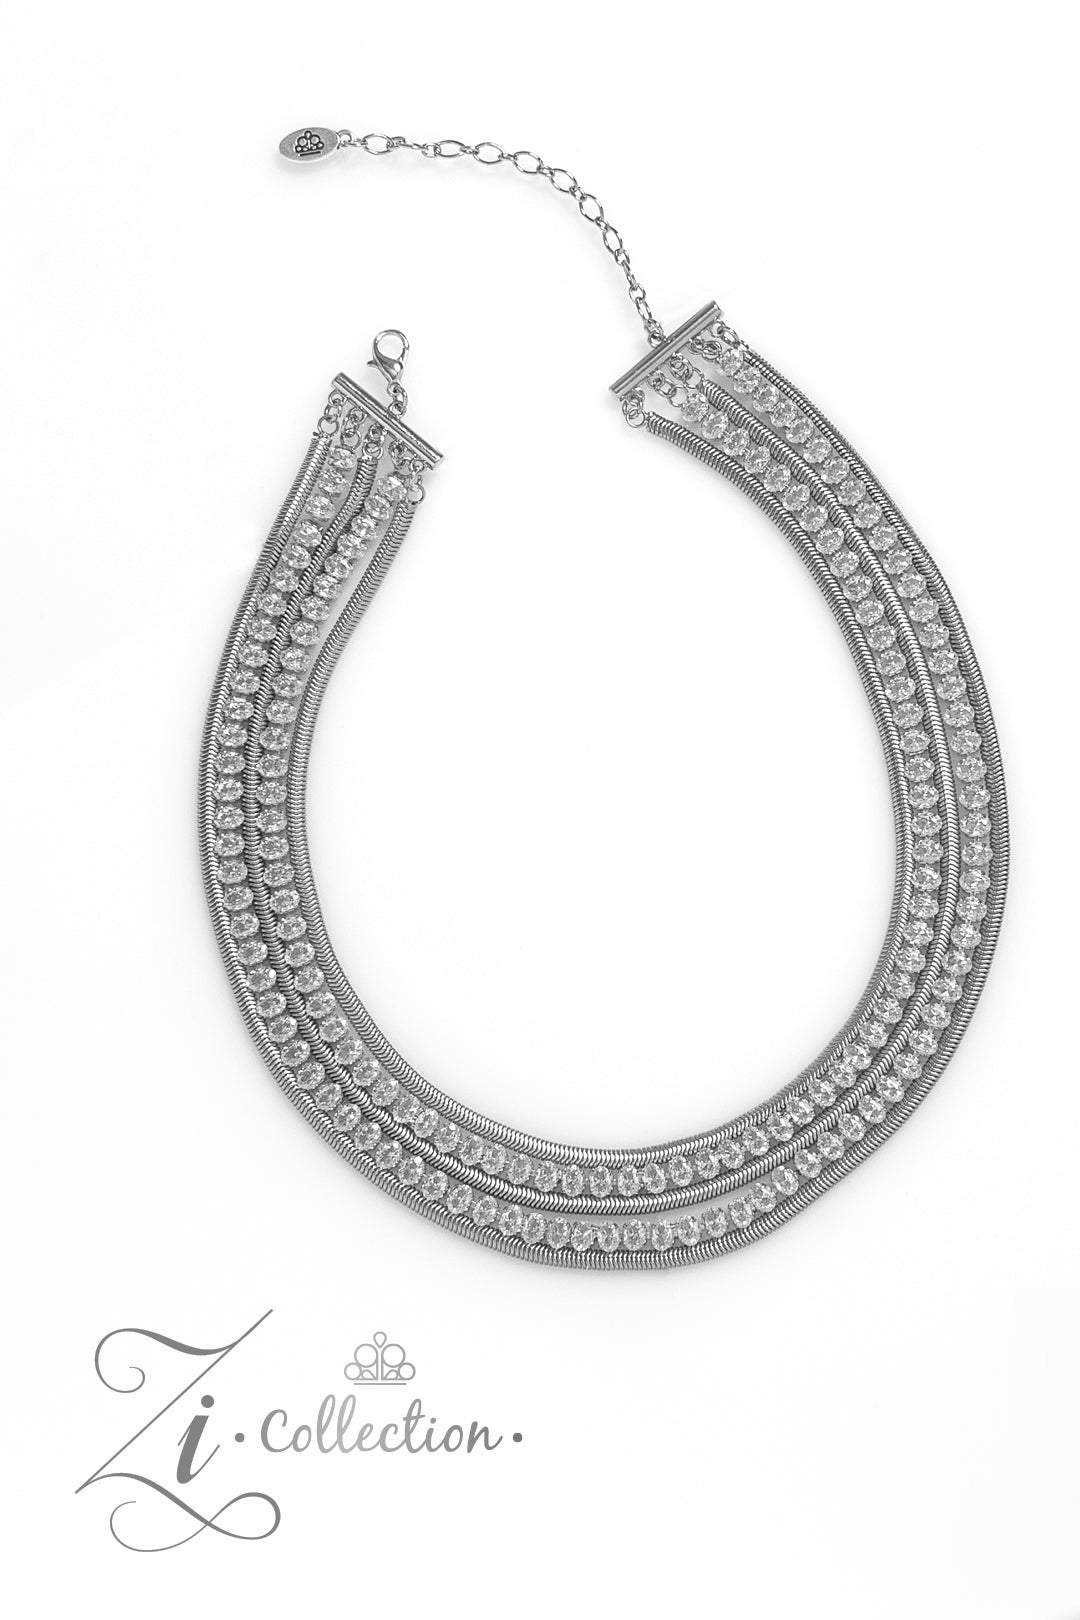 Flat silver snake chains alternate with explosive rows of sparkling white rhinestones in this 2023 Zi Collection piece from Paparazzi Accessories. Features an adjustable clasp closure and includes matching earrings from A Finishing Touch Jewelry